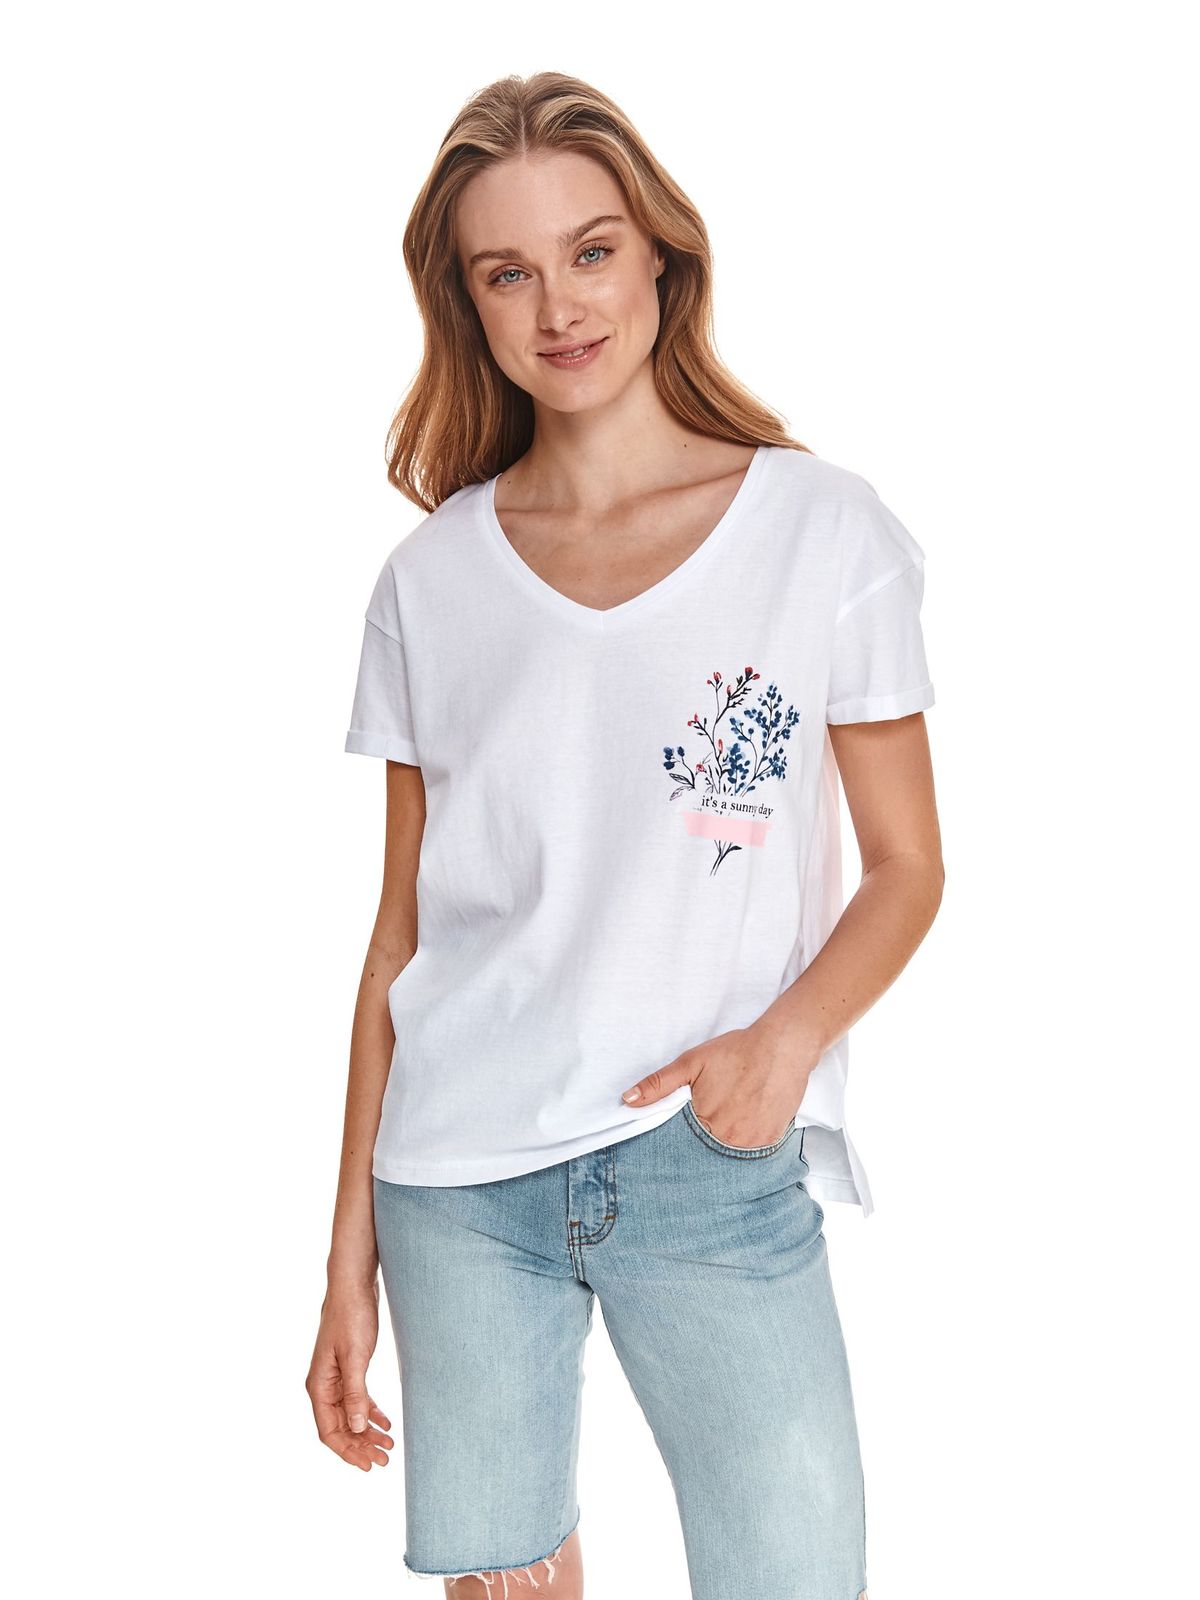 White t-shirt loose fit cotton with graphic details